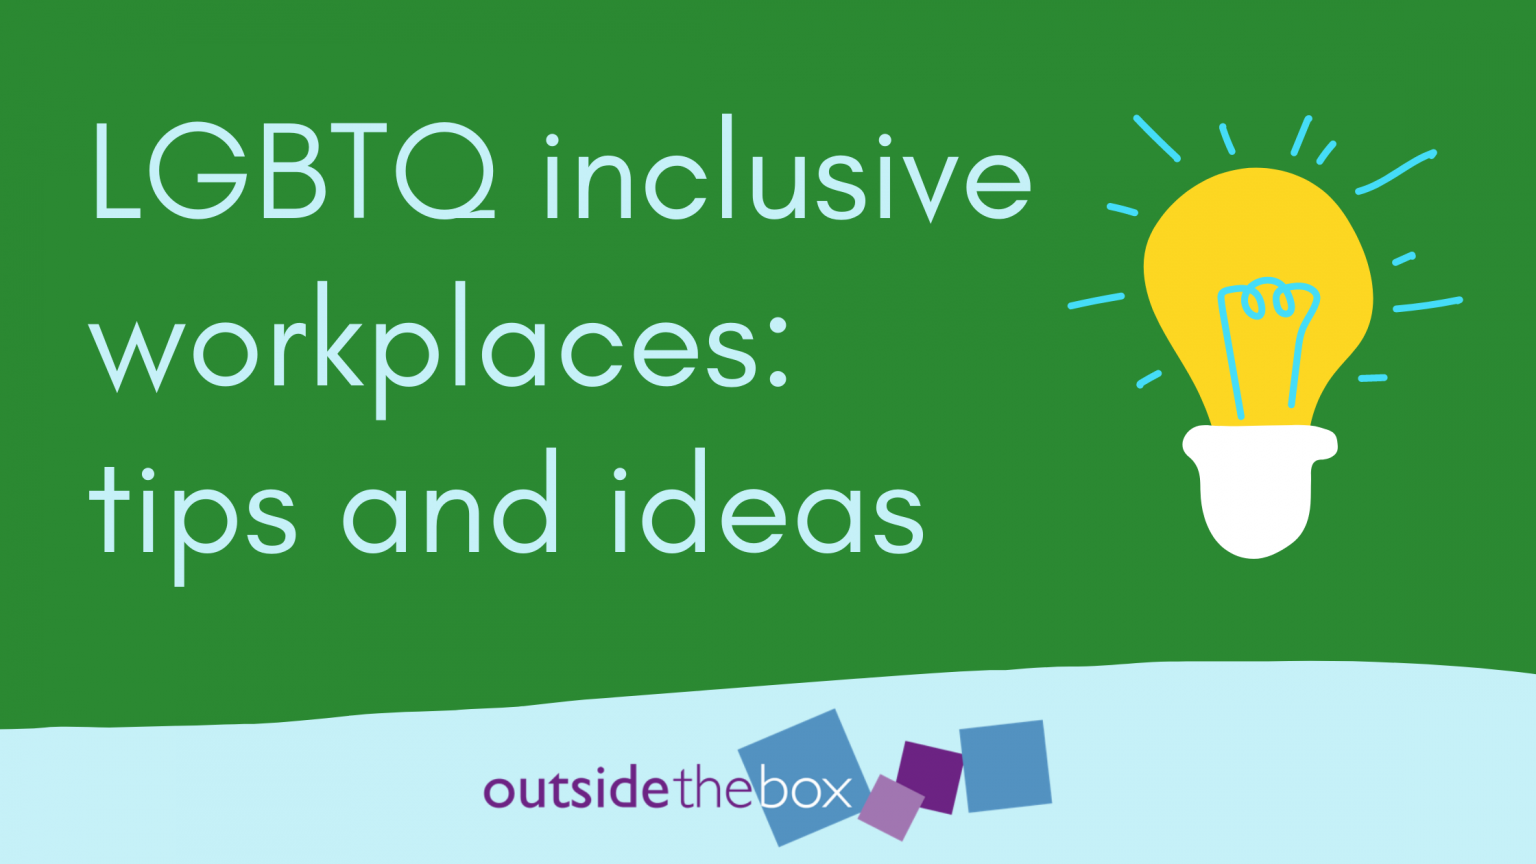 LGBTQ inclusive workplaces: tips and ideas